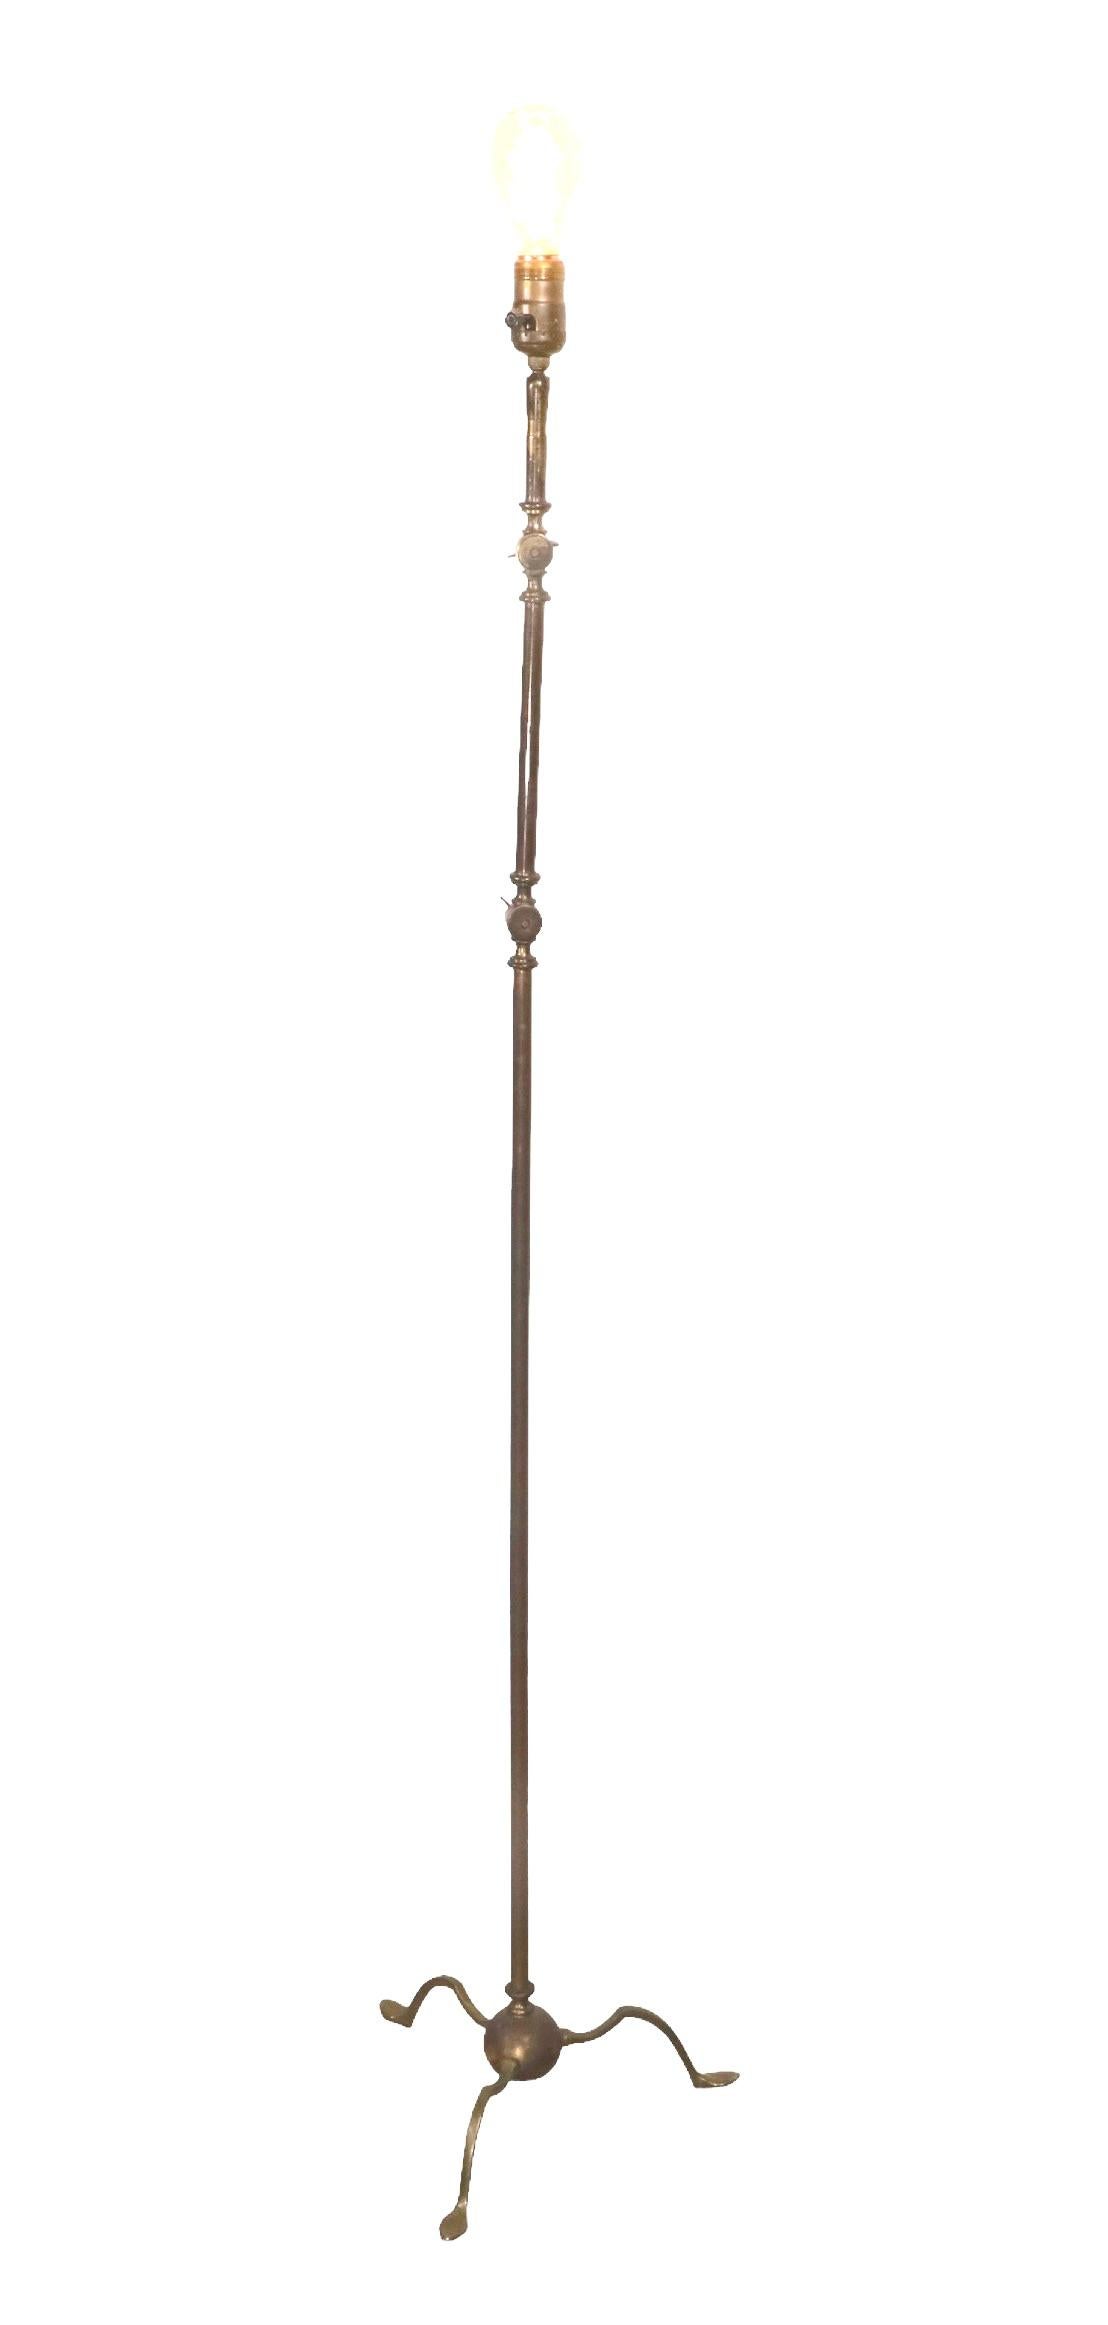 Articulating Brass Reading Floor Lamp in the Classical Style, C. 1900- 1930's In Good Condition For Sale In New York, NY